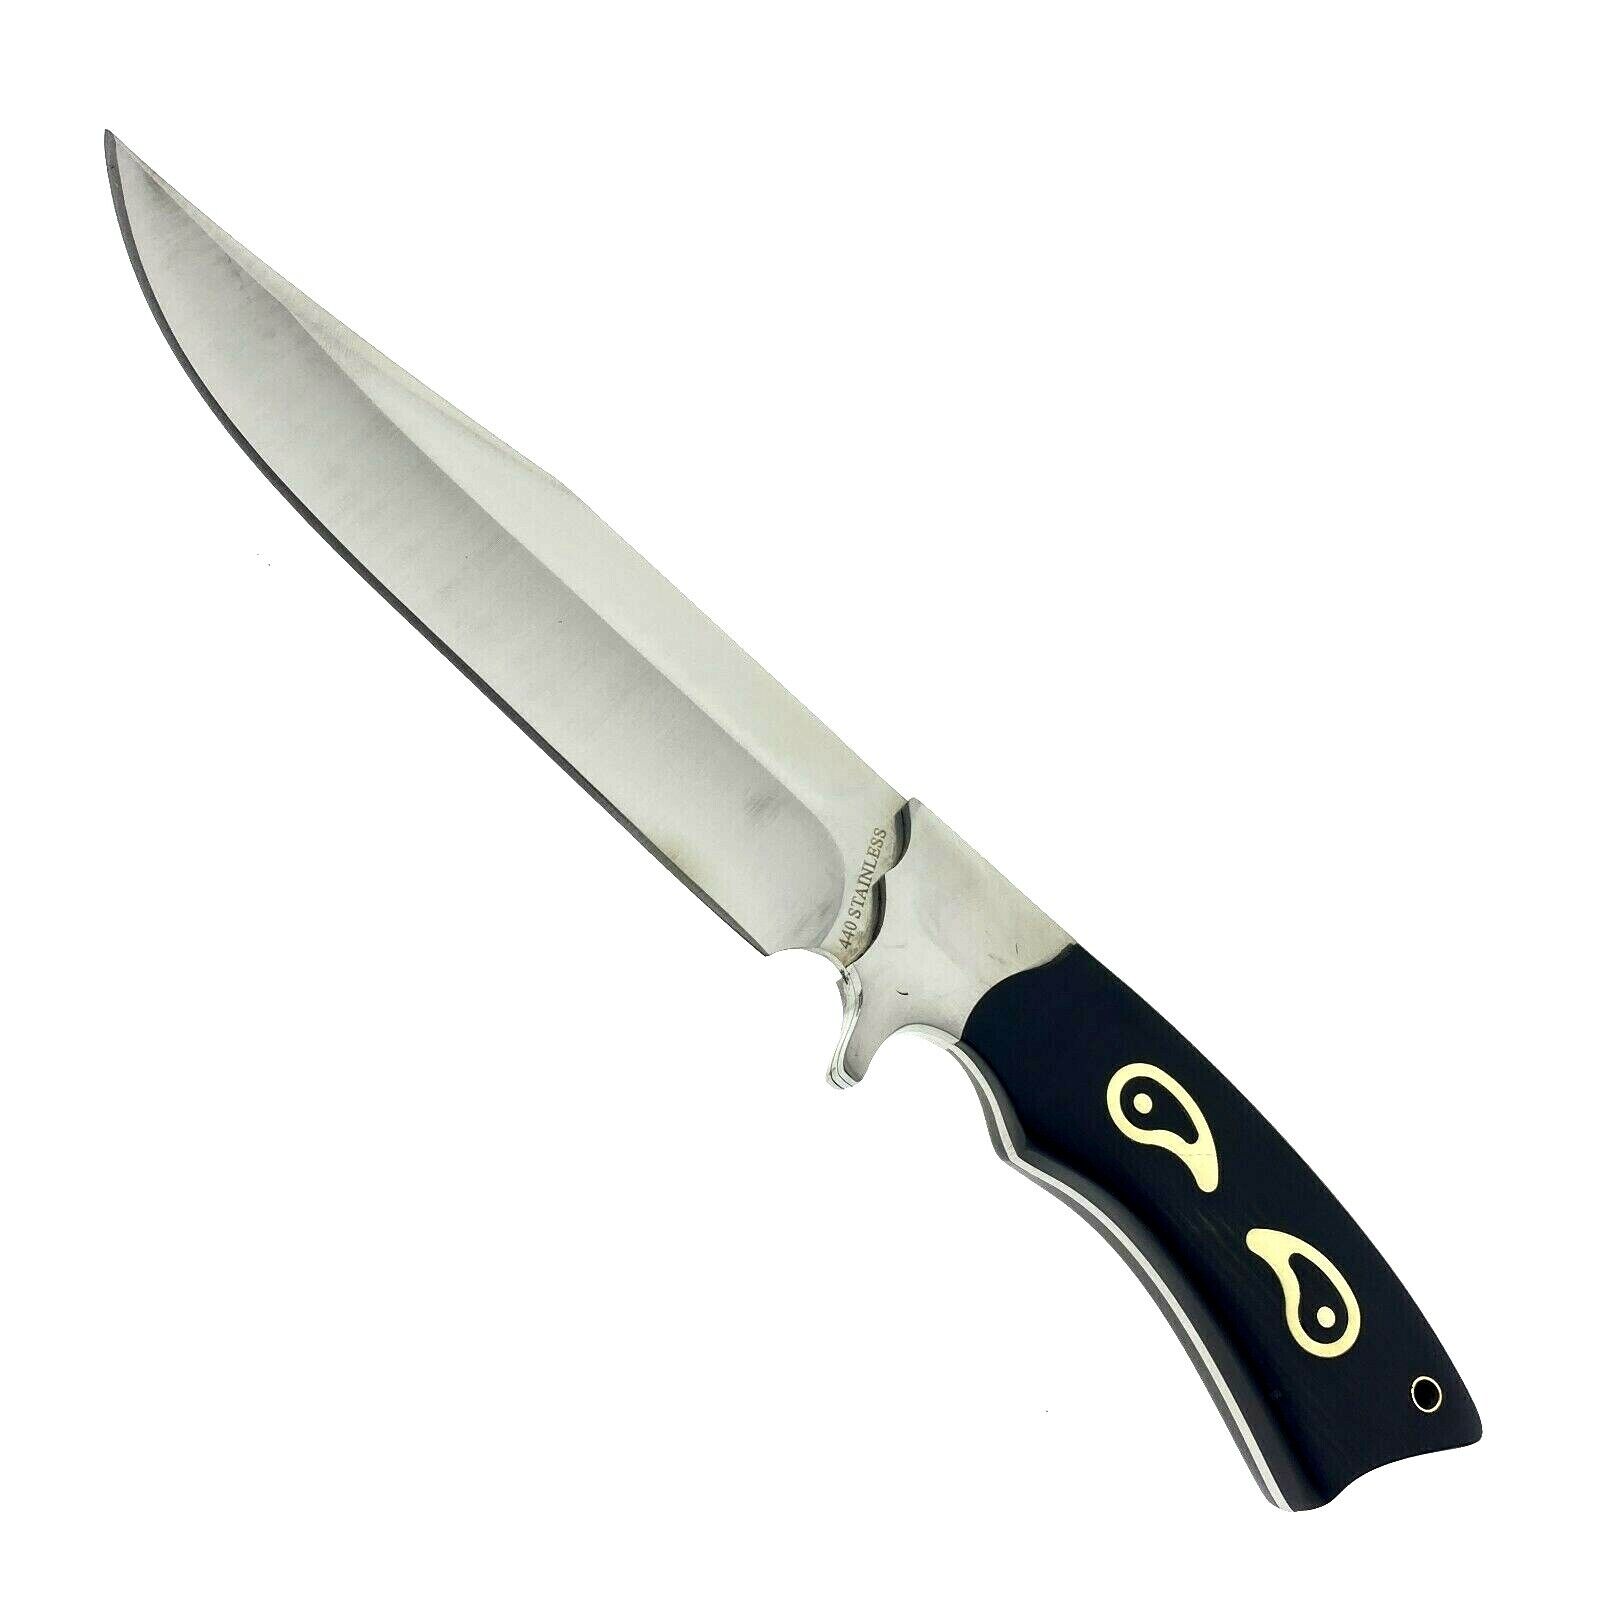 Rocky Mountain Hunting Knife 81/2 inch Fixed Blade Hunting Knife for Outdoors